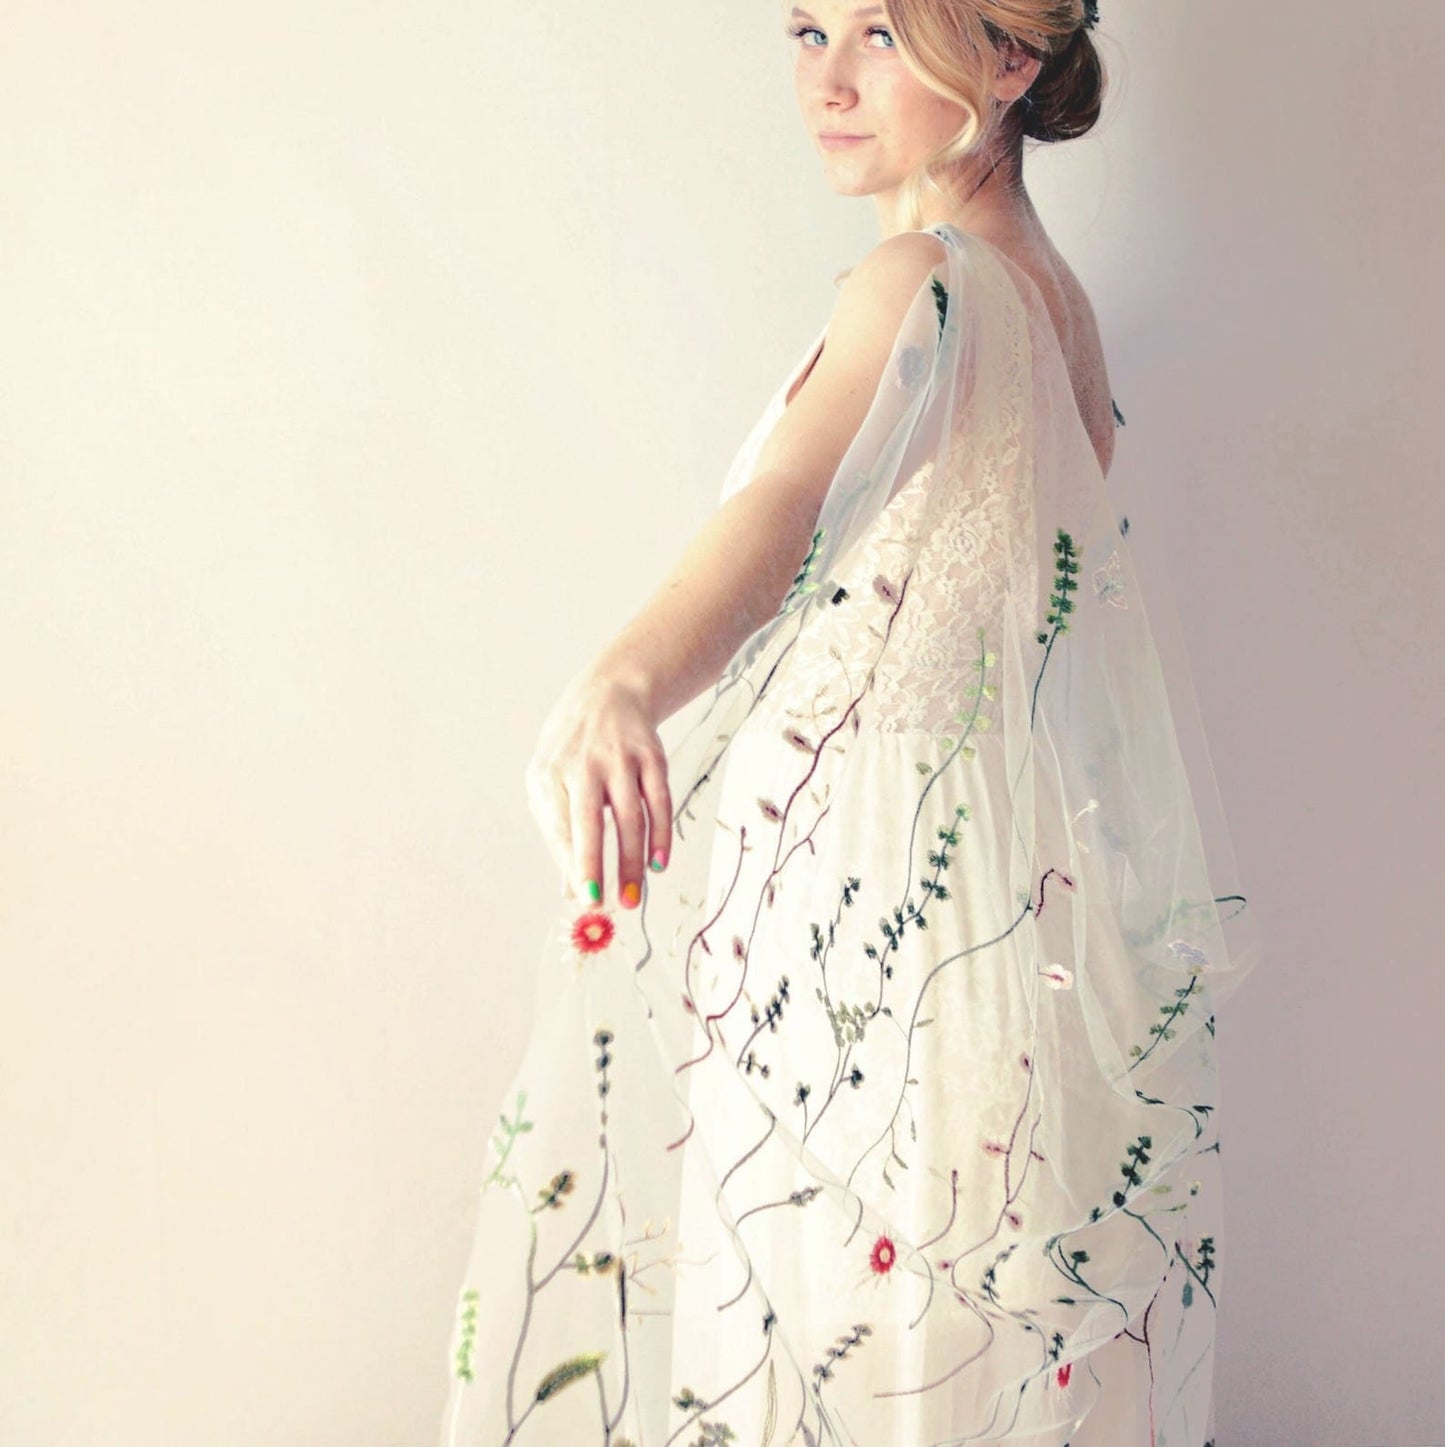 Wildflower embroidered floral bridal drape cape